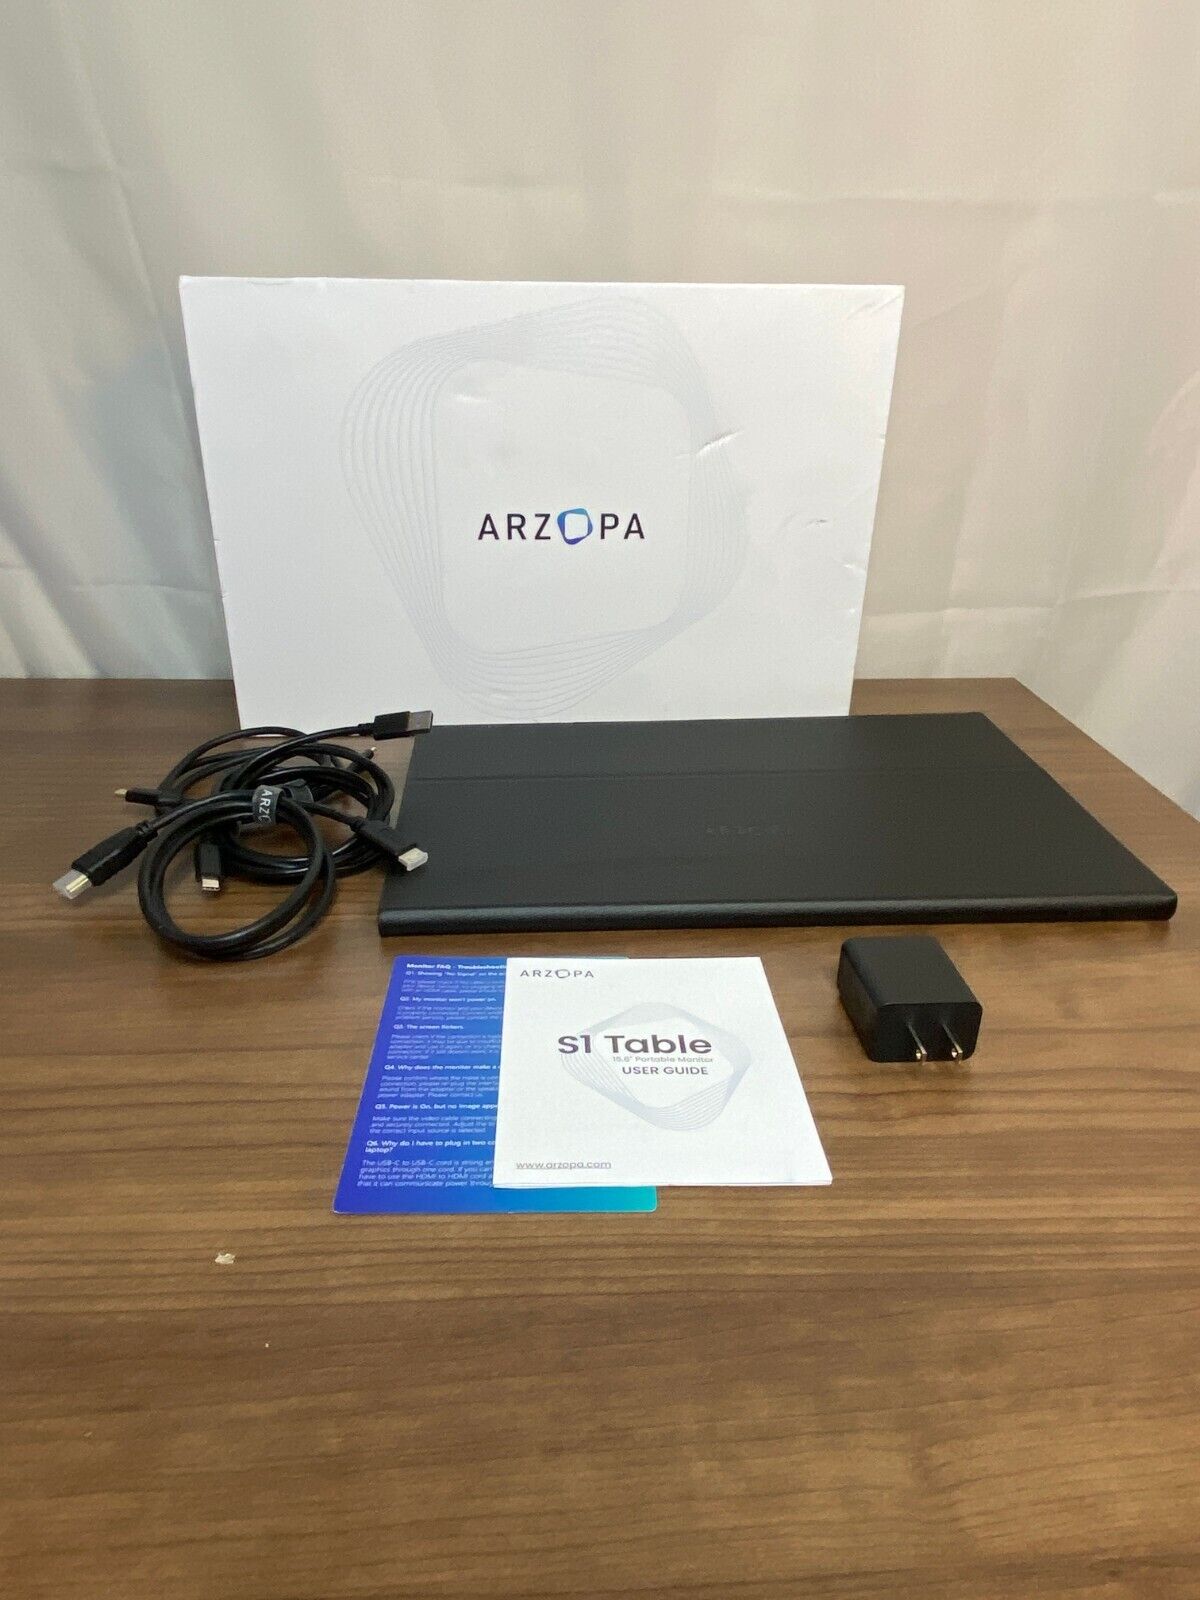 Arzopa S1 Table Black 1080p 15.6 Inch FHD Portable Monitor With Manual